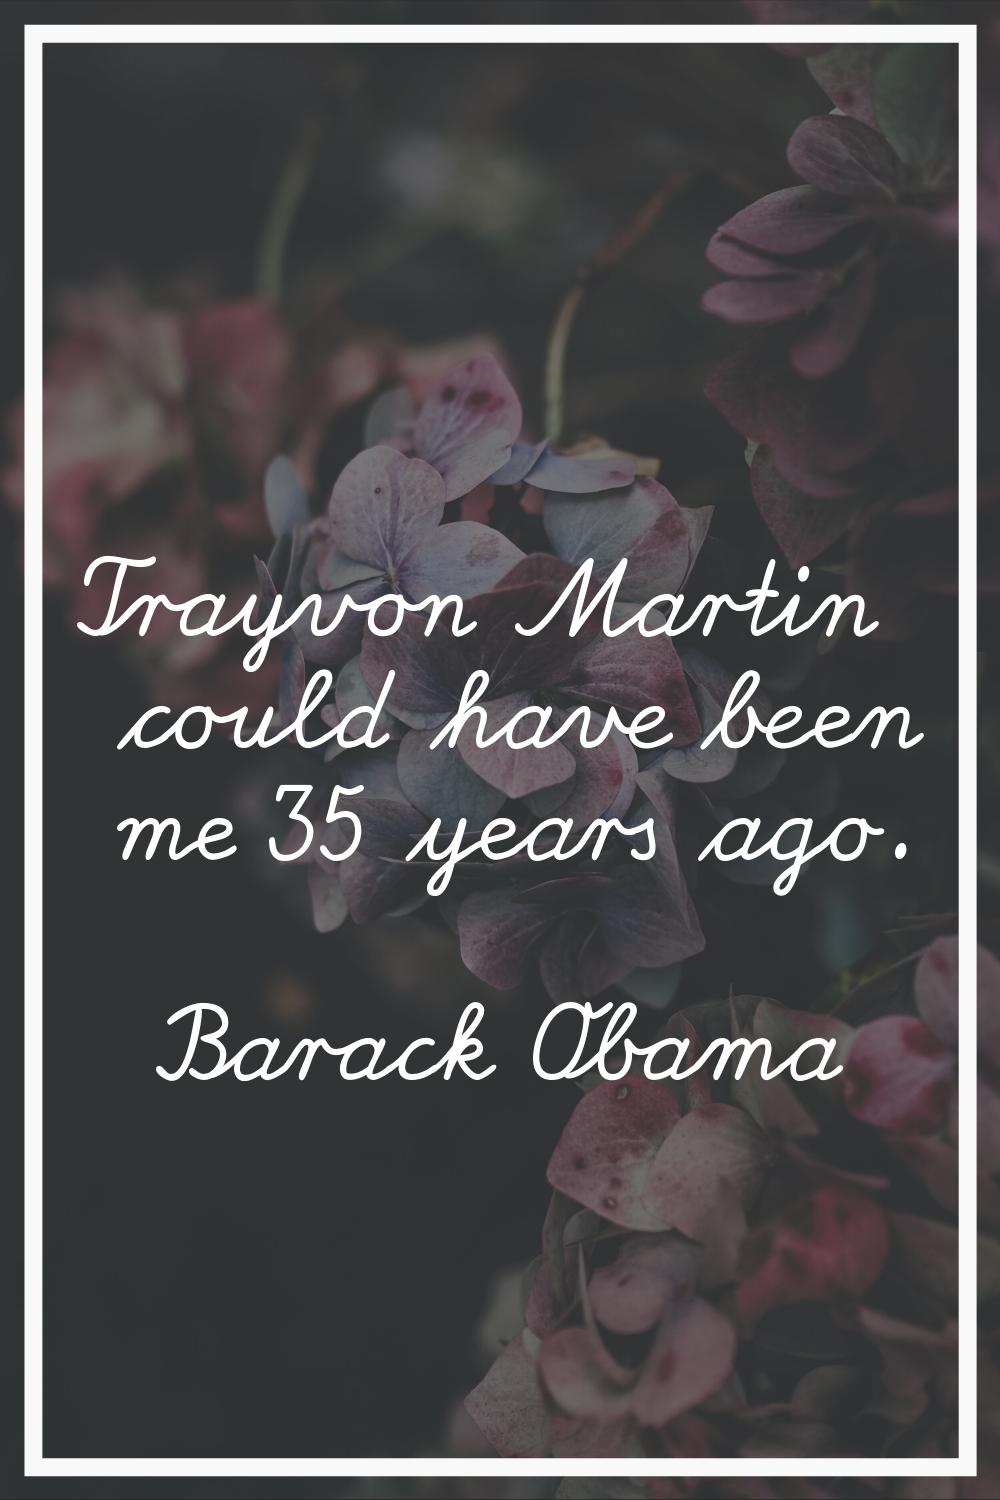 Trayvon Martin could have been me 35 years ago.